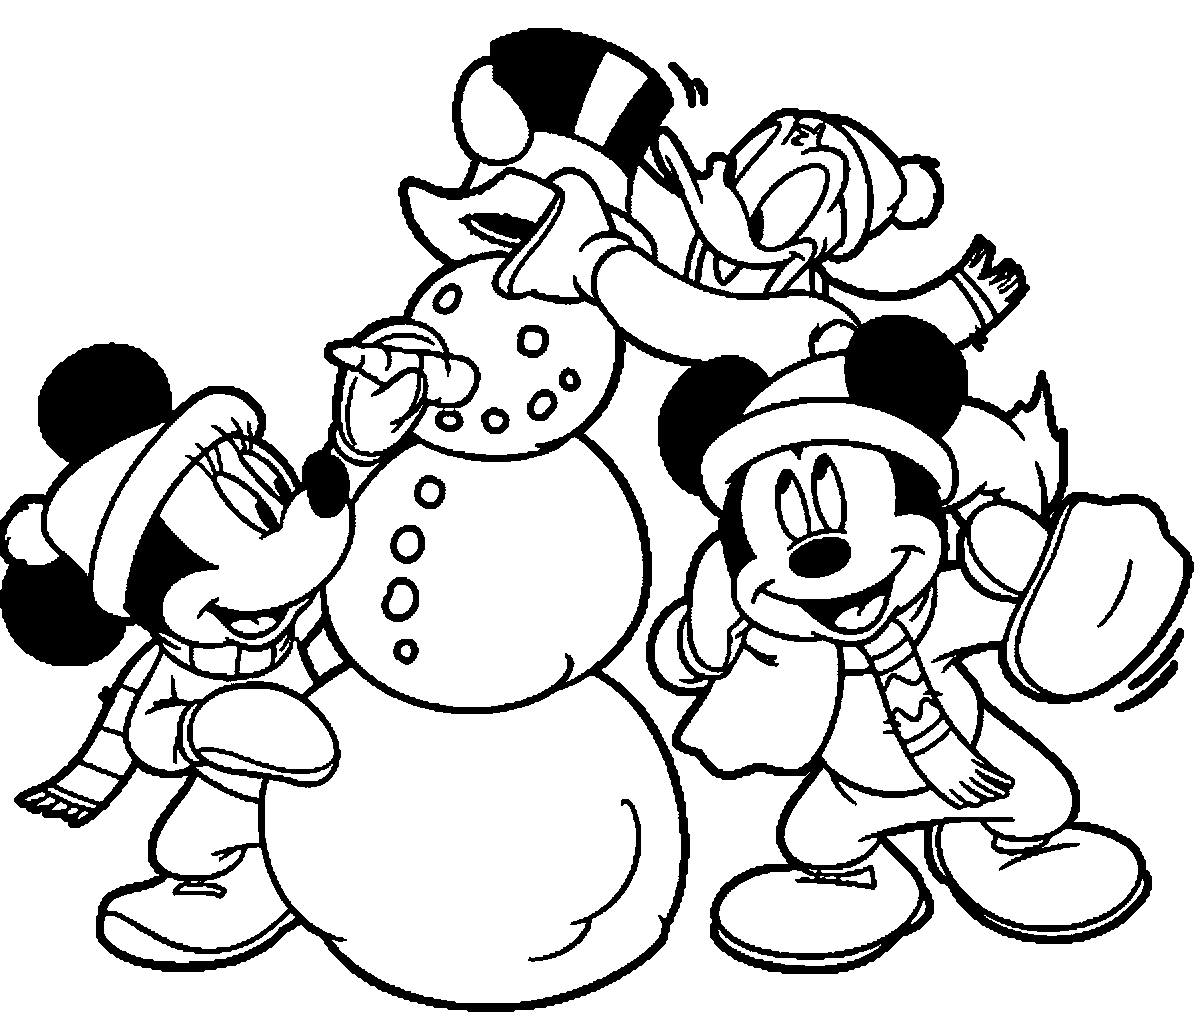 Snowman New Year Coloring Page